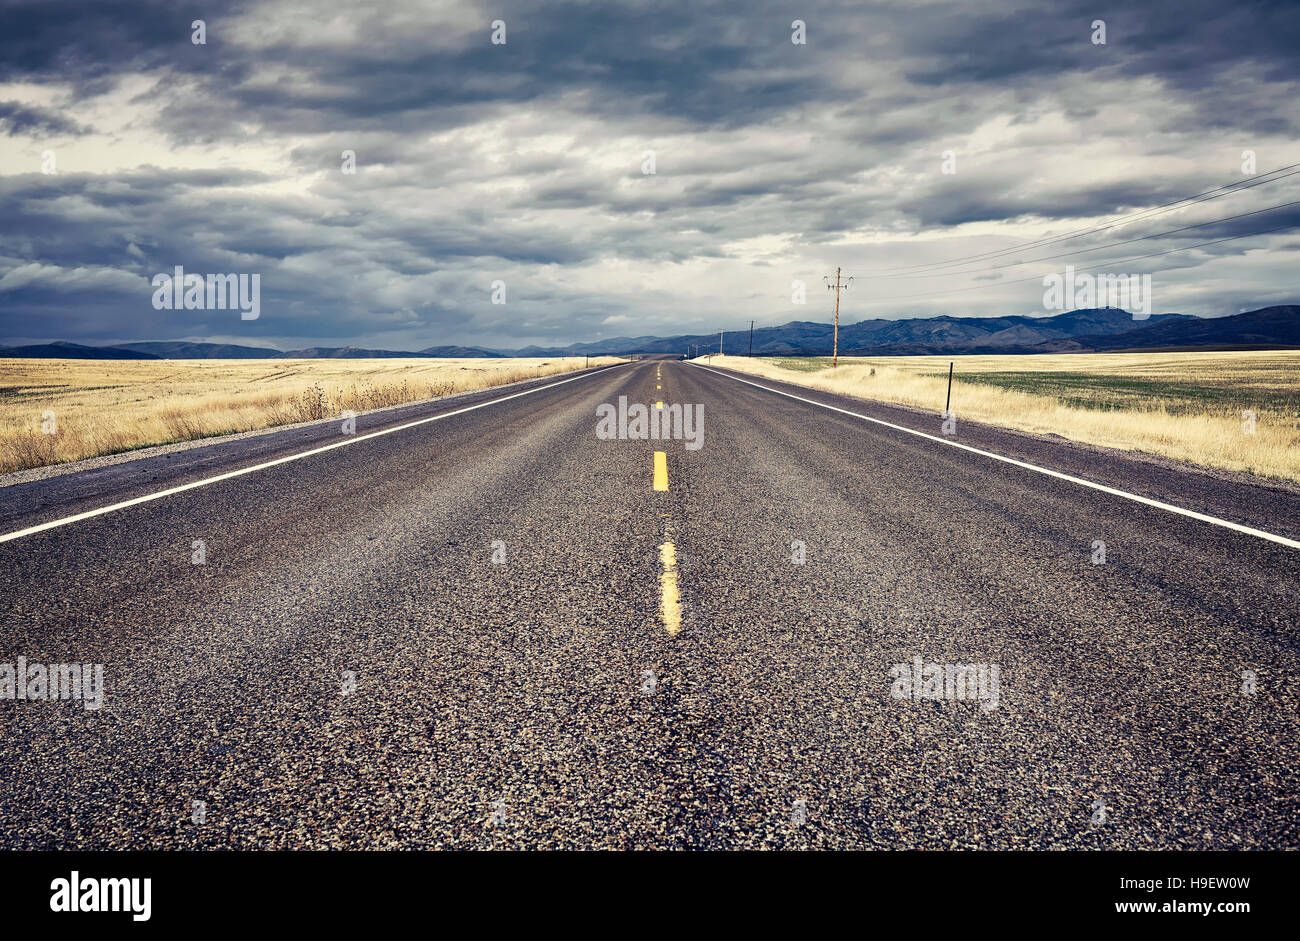 Retro stylized empty rural road with rainy clouds, USA. Stock Photo